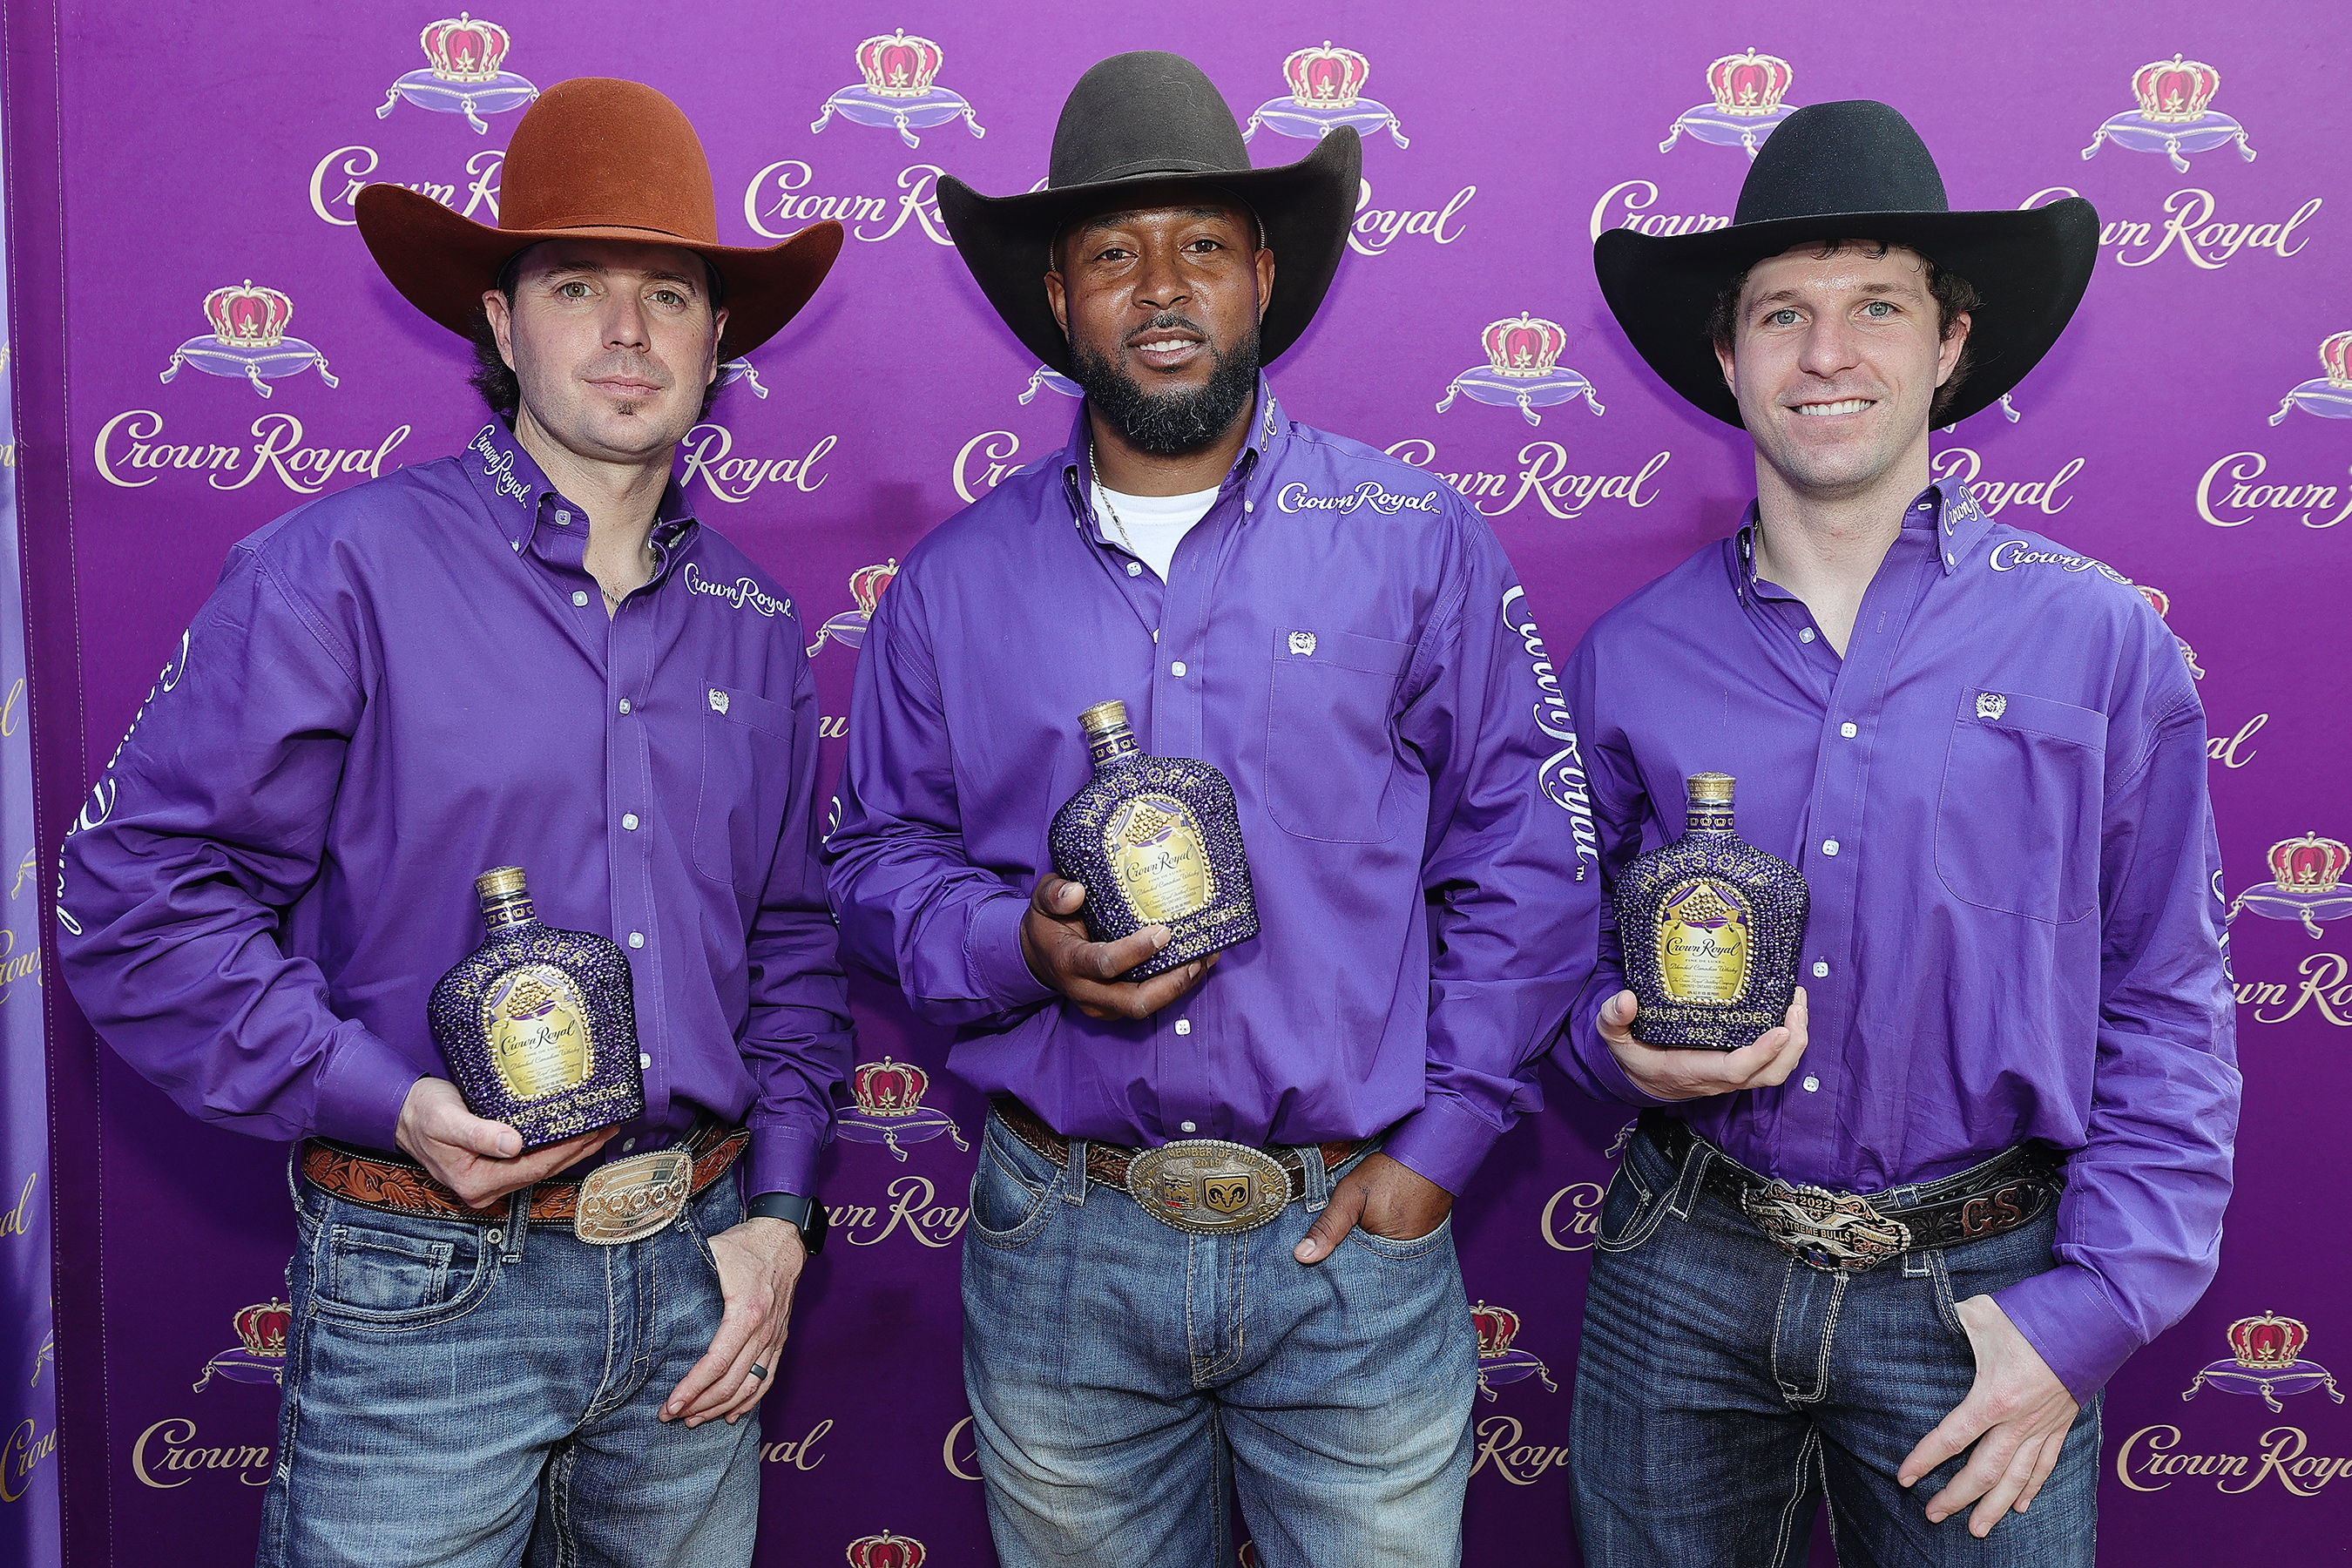 Wesley Silcox, Tory Johnson and Garrett Smith are awarded the Crown Royal "Royal Rider" award at the Houston Rodeo at NRG Park in Houston, Texas. (Photo by Bob Levey/Getty Images for Crown Royal)